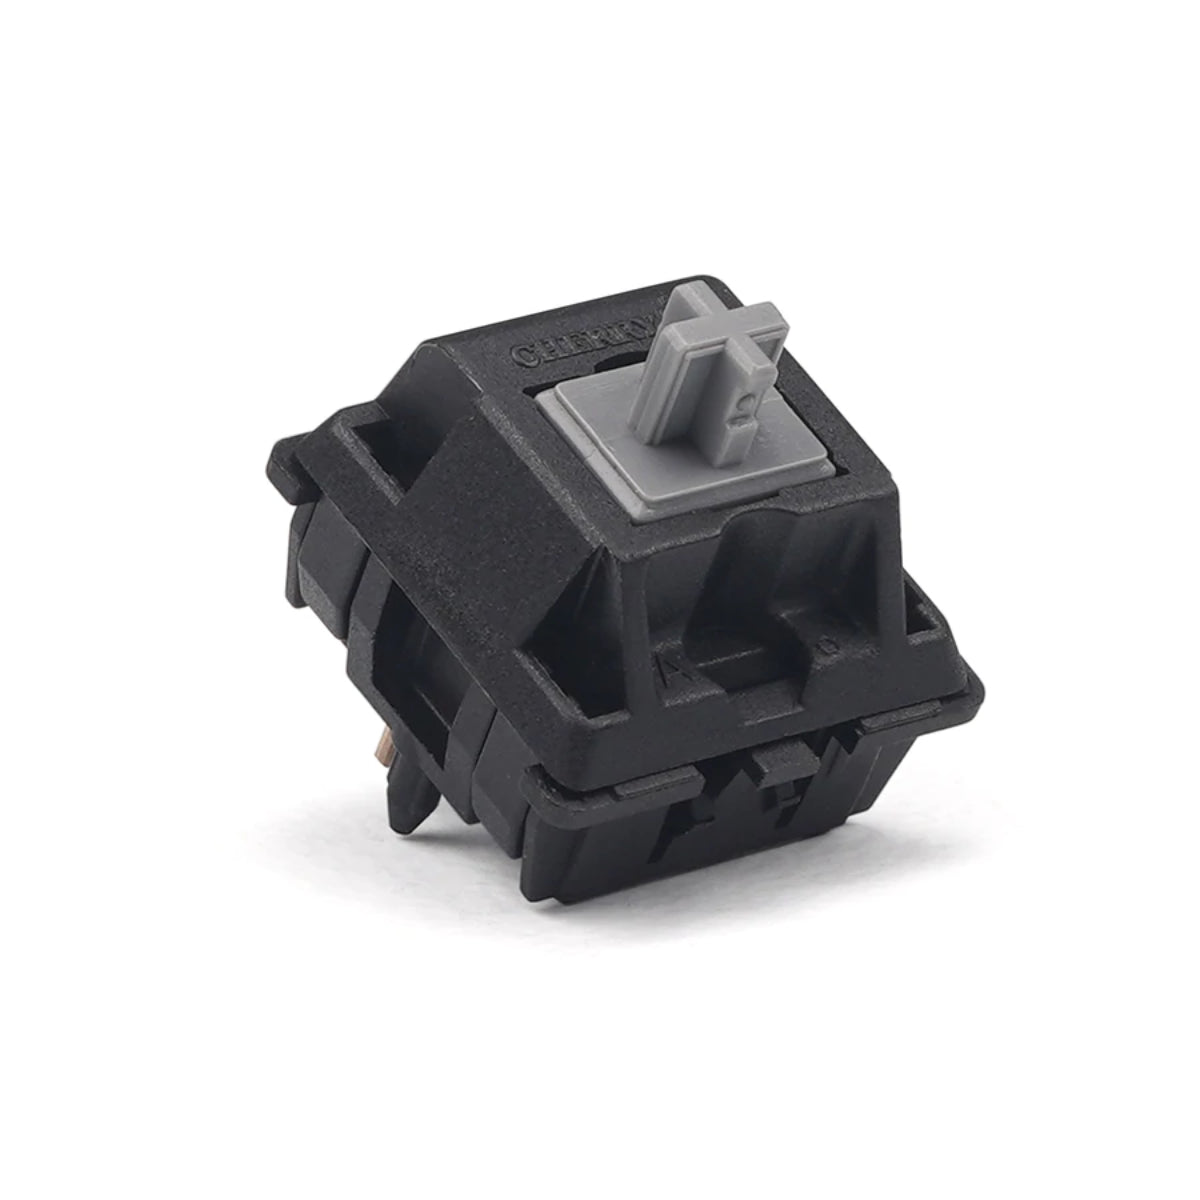 KBD Fans Cherry MX Hyperglide Switches - Linear Grey - Store 974 | ستور ٩٧٤